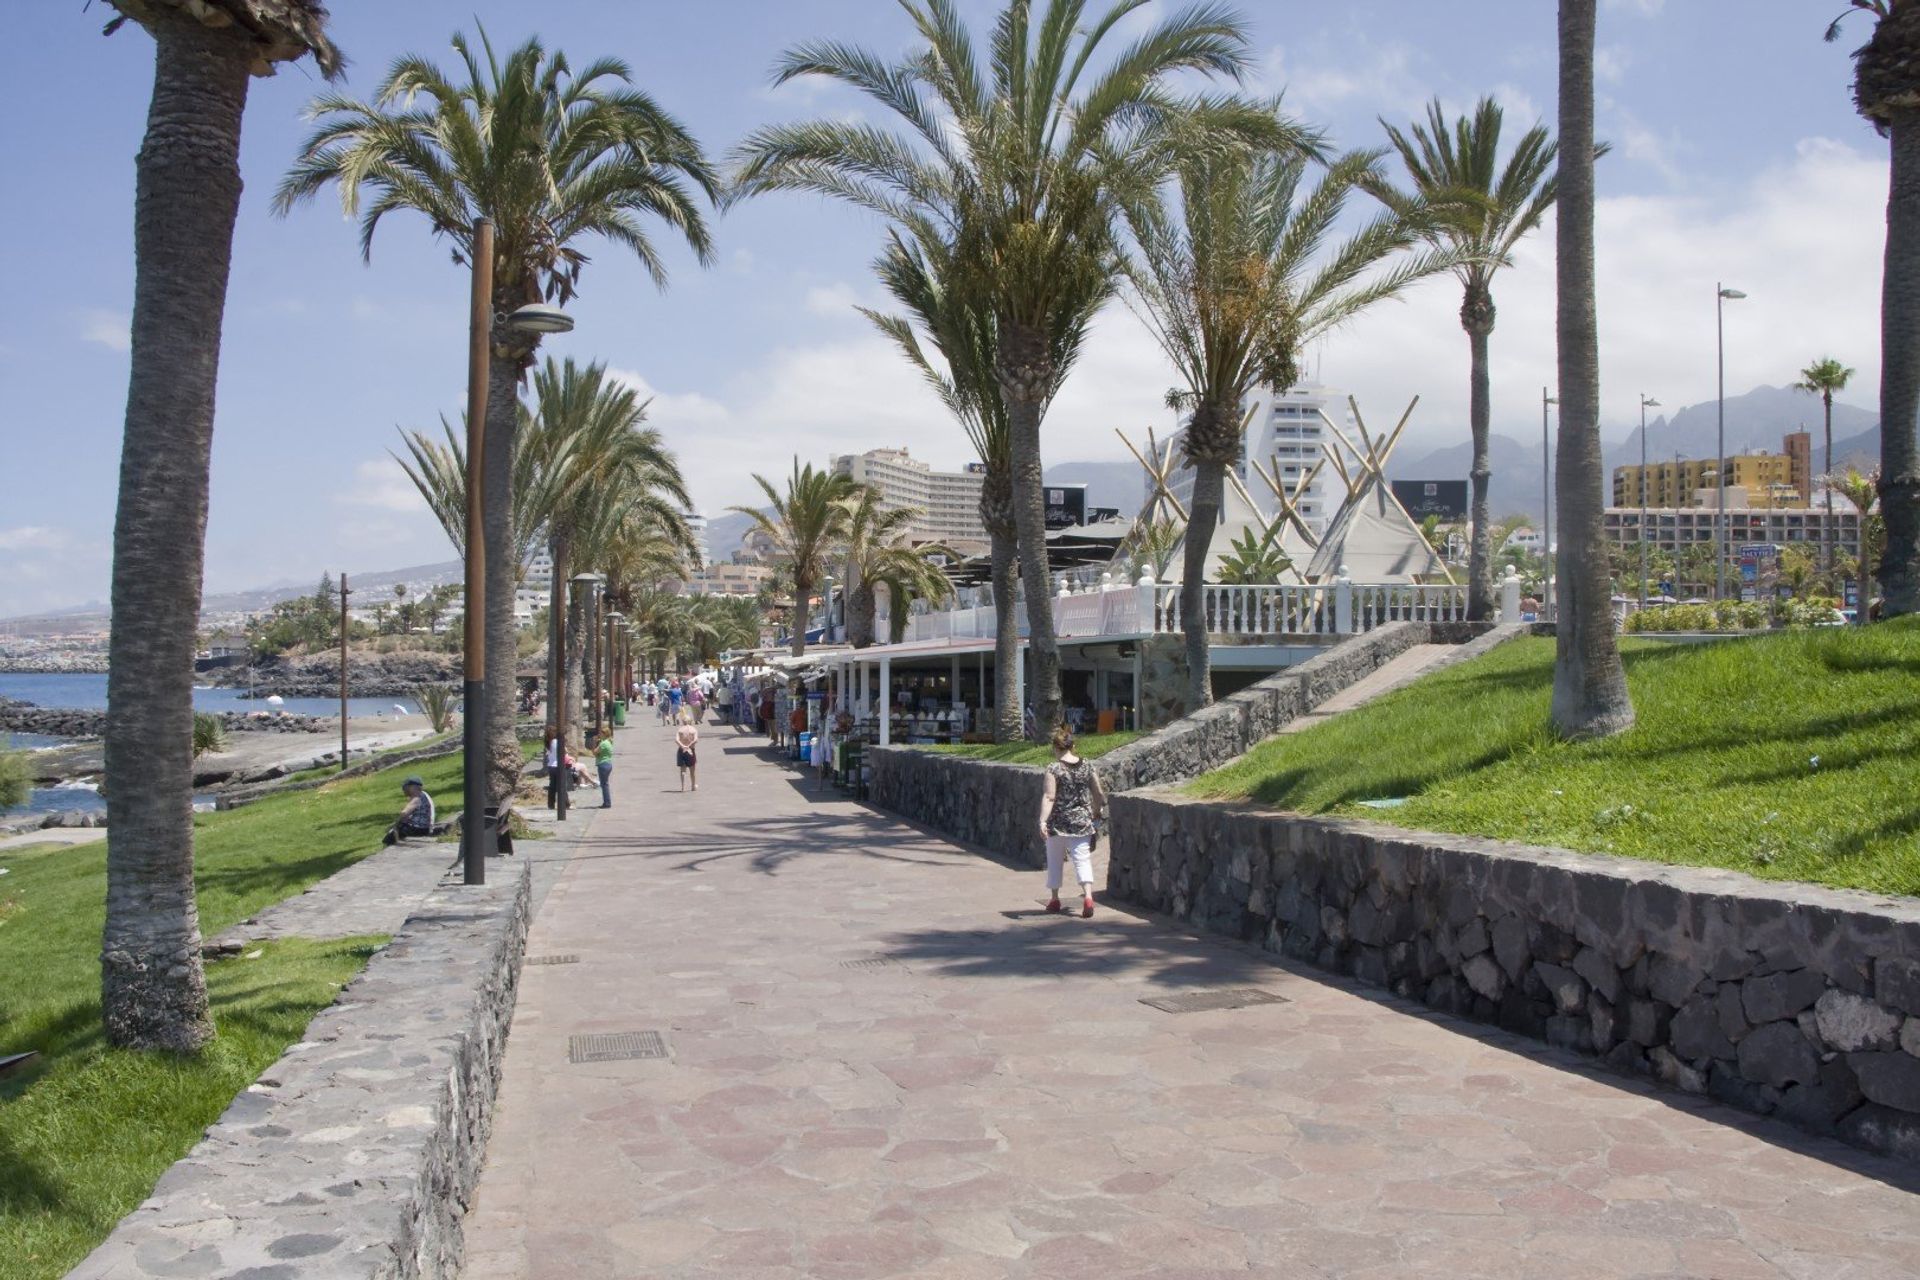 Playa de las Americas' beach promenade known as 'The Golden Mile', with its stretch of restaurants and boutiques